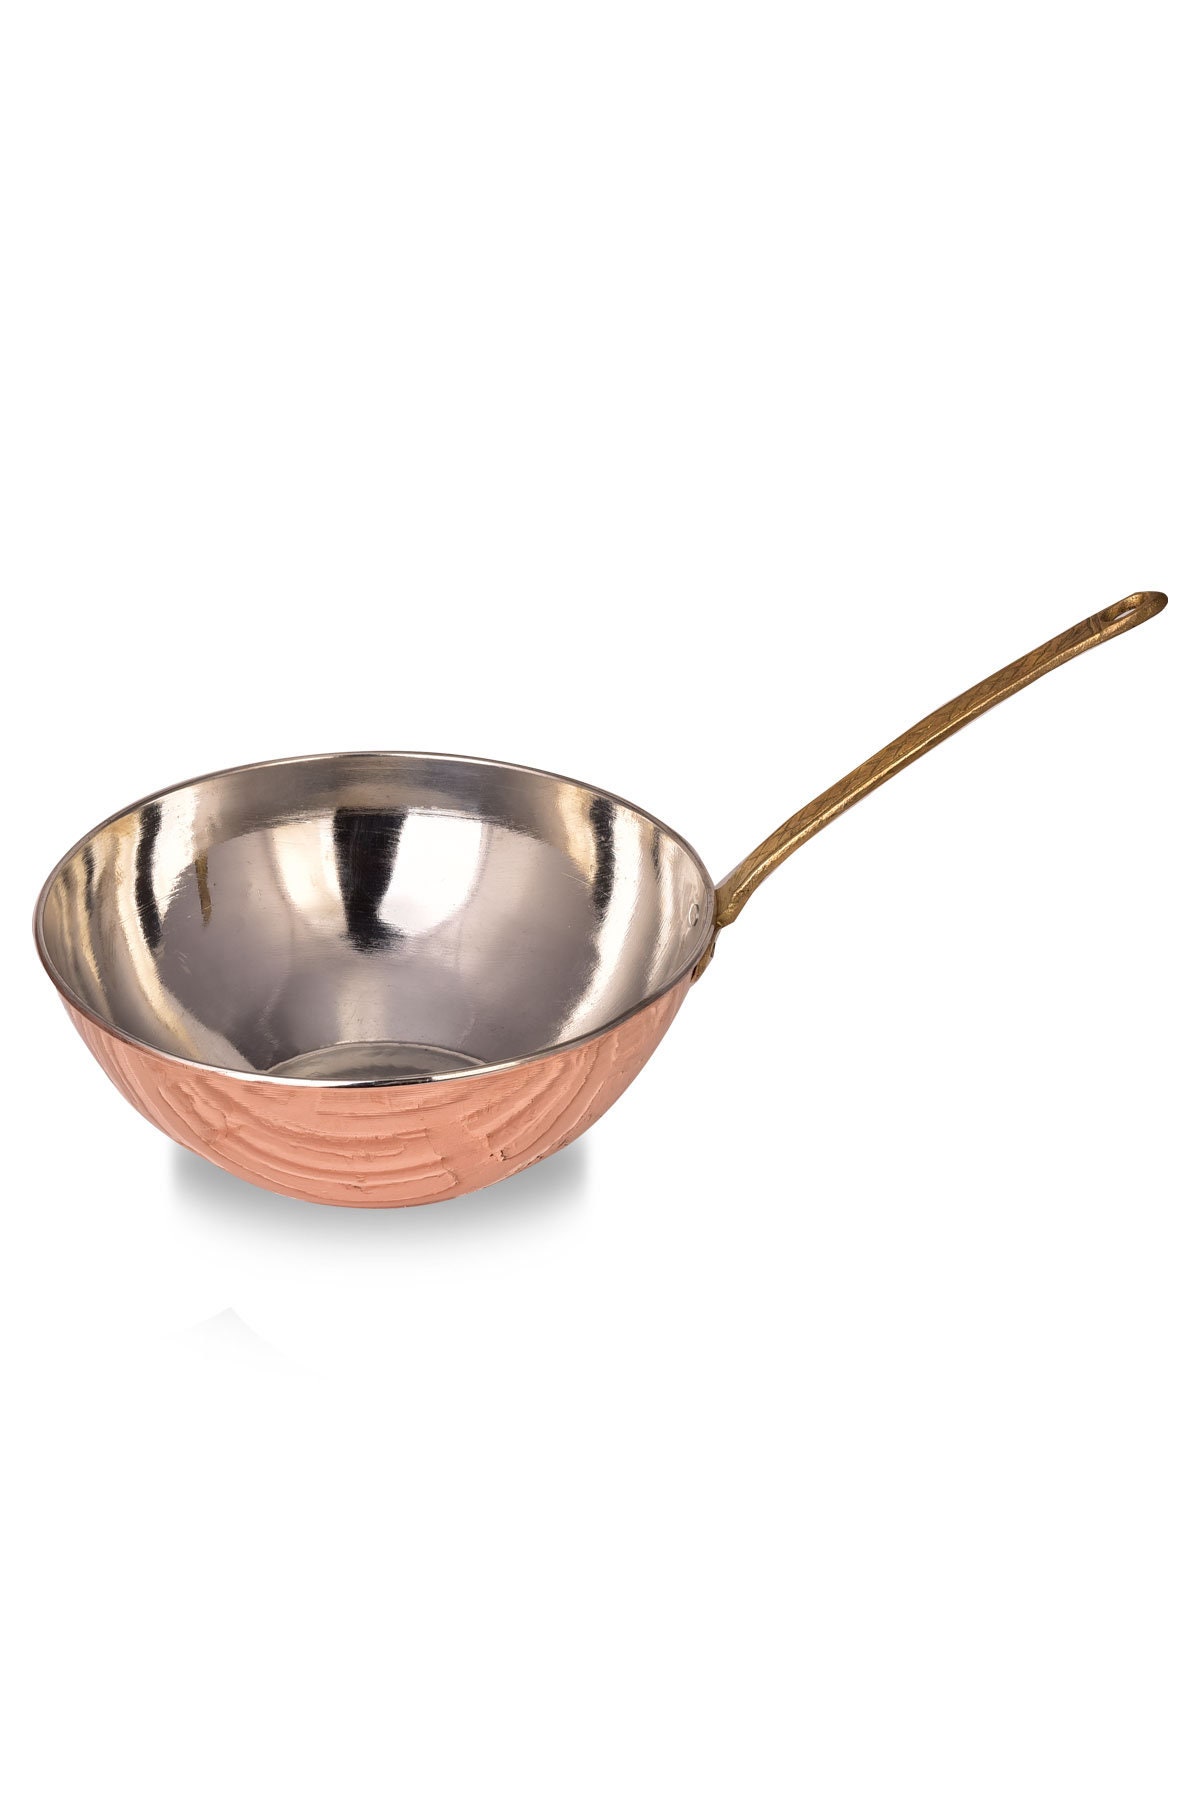 Copper,Diameter 30cm Without Ears Thickened Pure Copper Wok Handmade Copper Wok Non Stick Stir-Fry Wok 